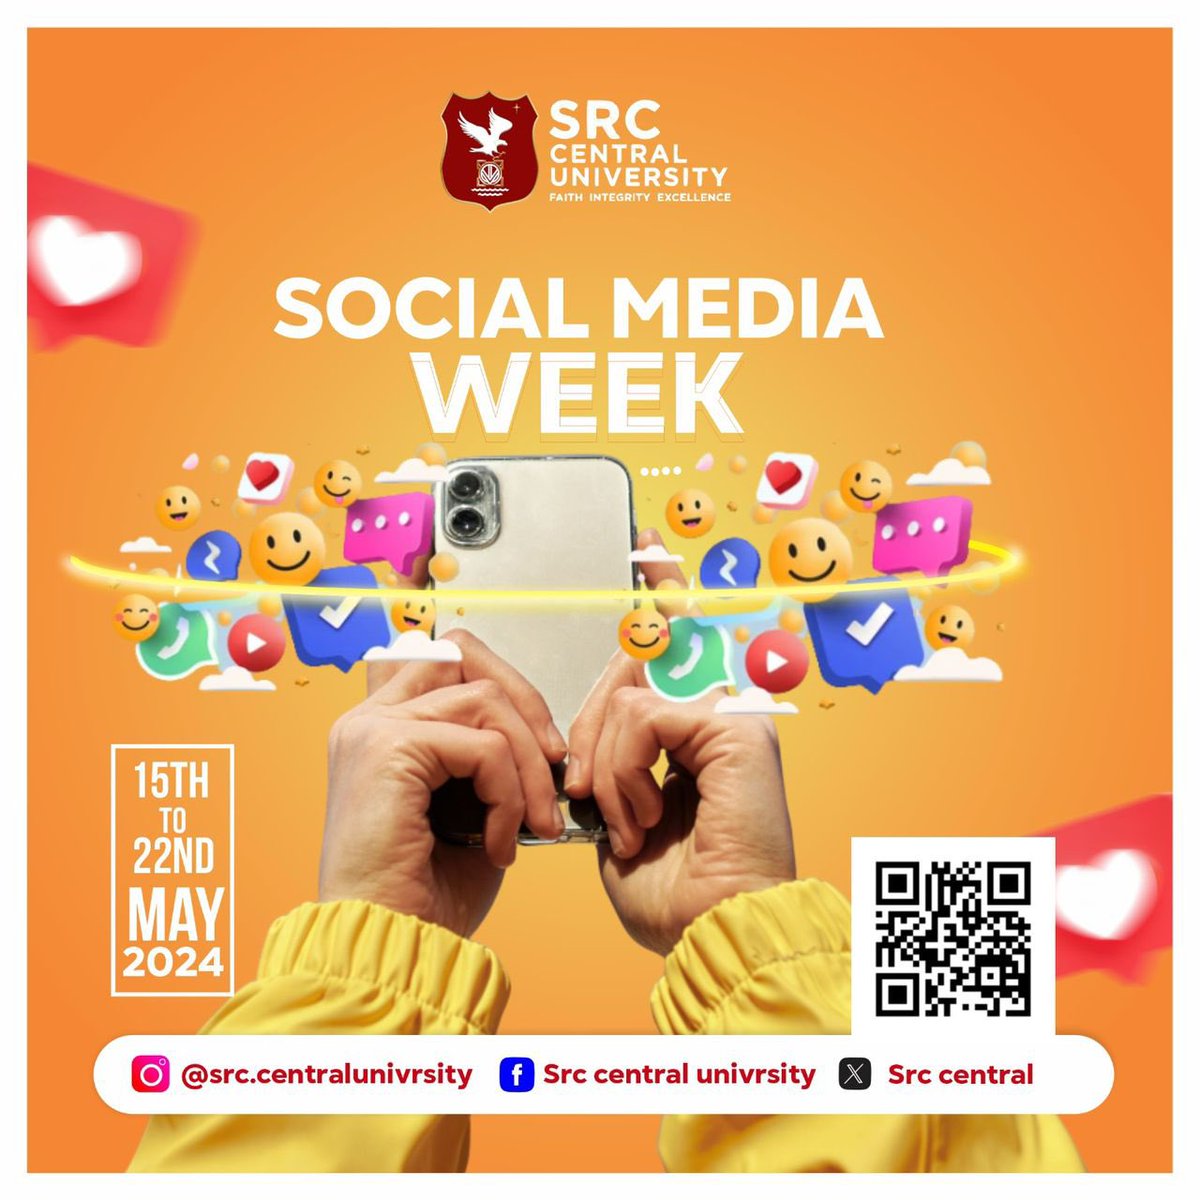 Social Media Week is finally here! From the 15th to 22nd of May, the SRC’s social media pages will be buzzing with new and exciting content. Follow all our pages (details on flyer) and turn on the post notifications. Watch out for Giveaways too😉🎁 #CUsrc